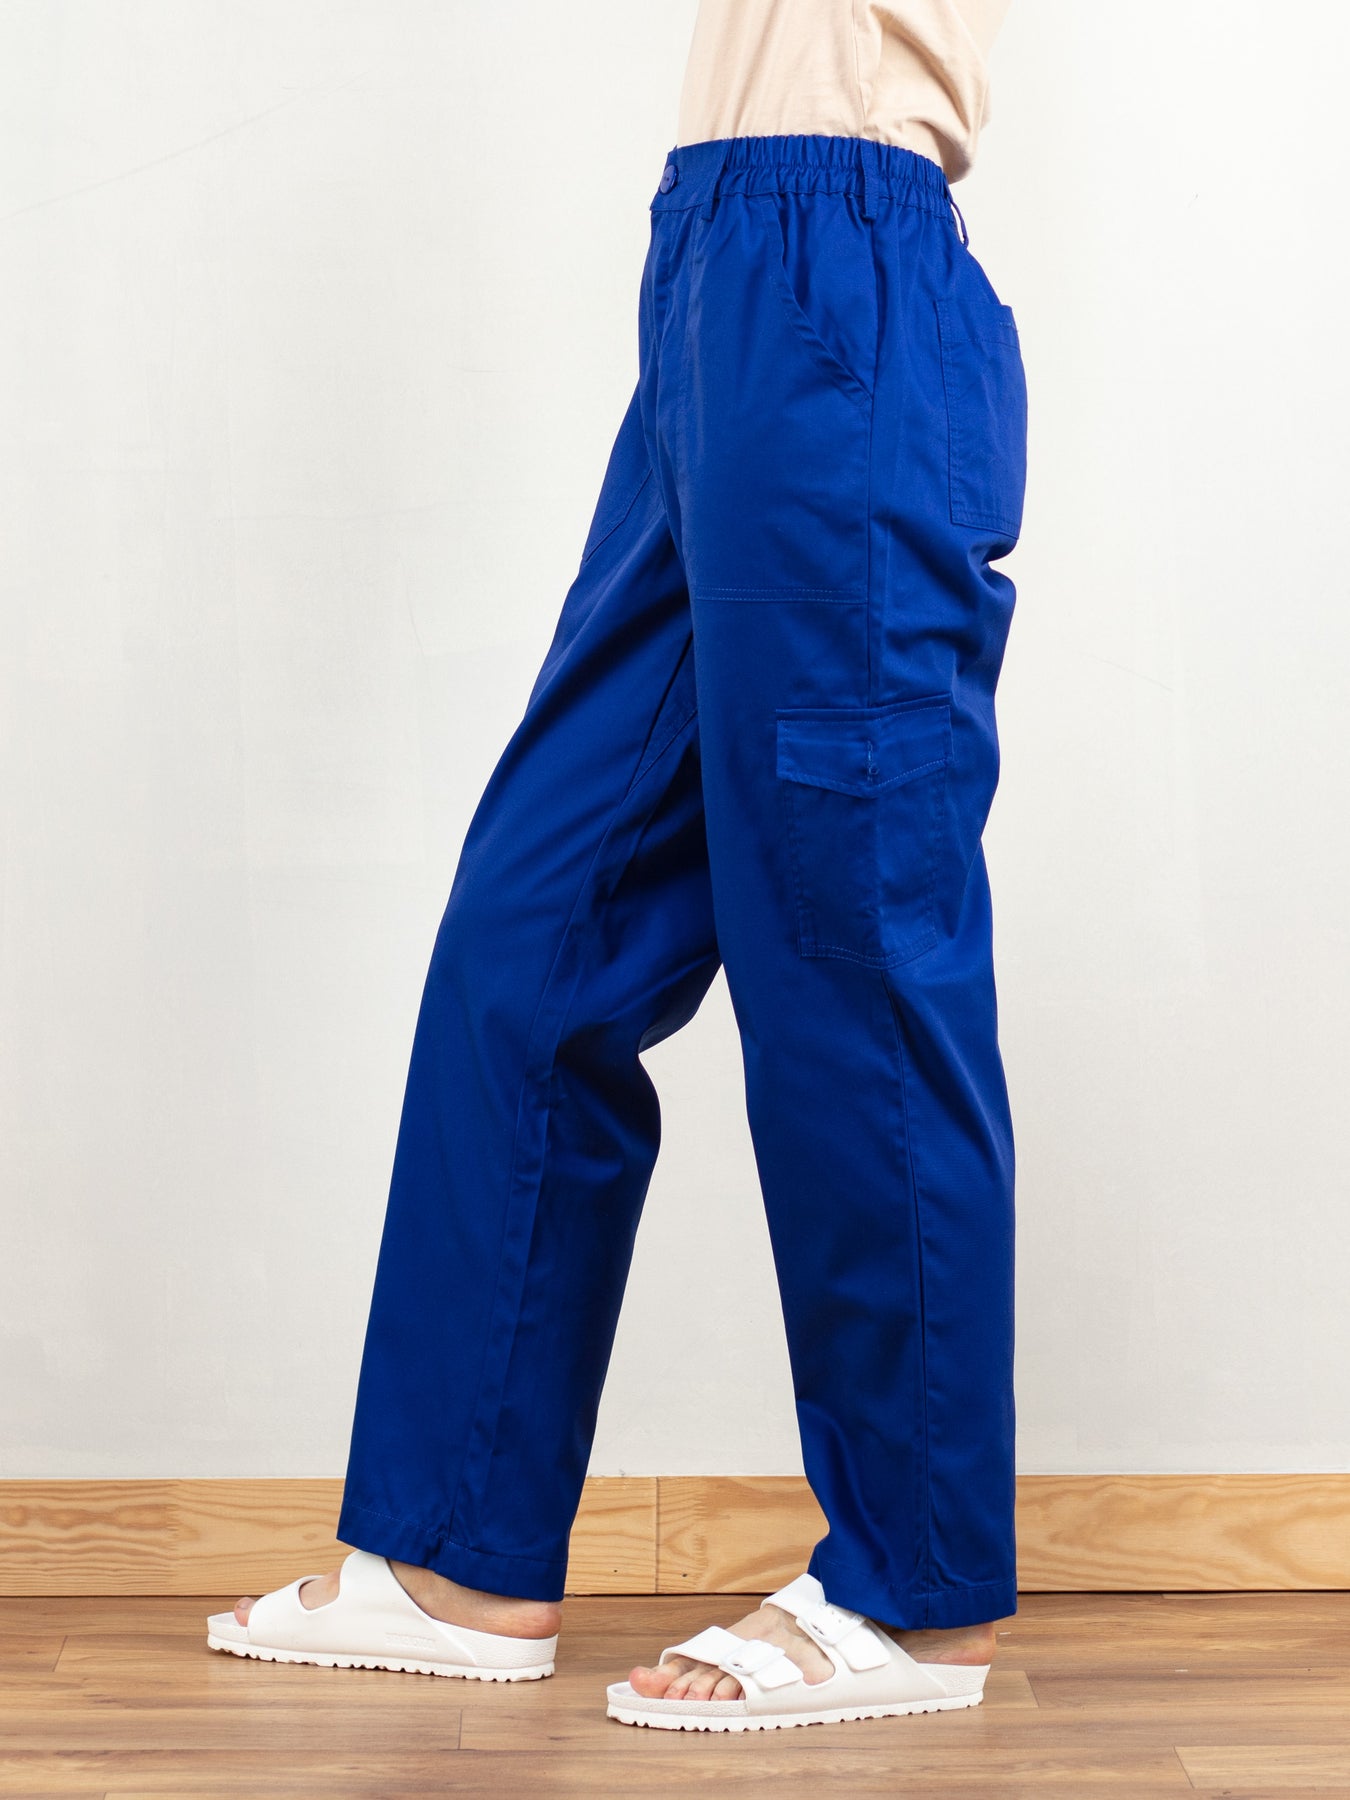 Work Pants for Women - Blue - Size 16